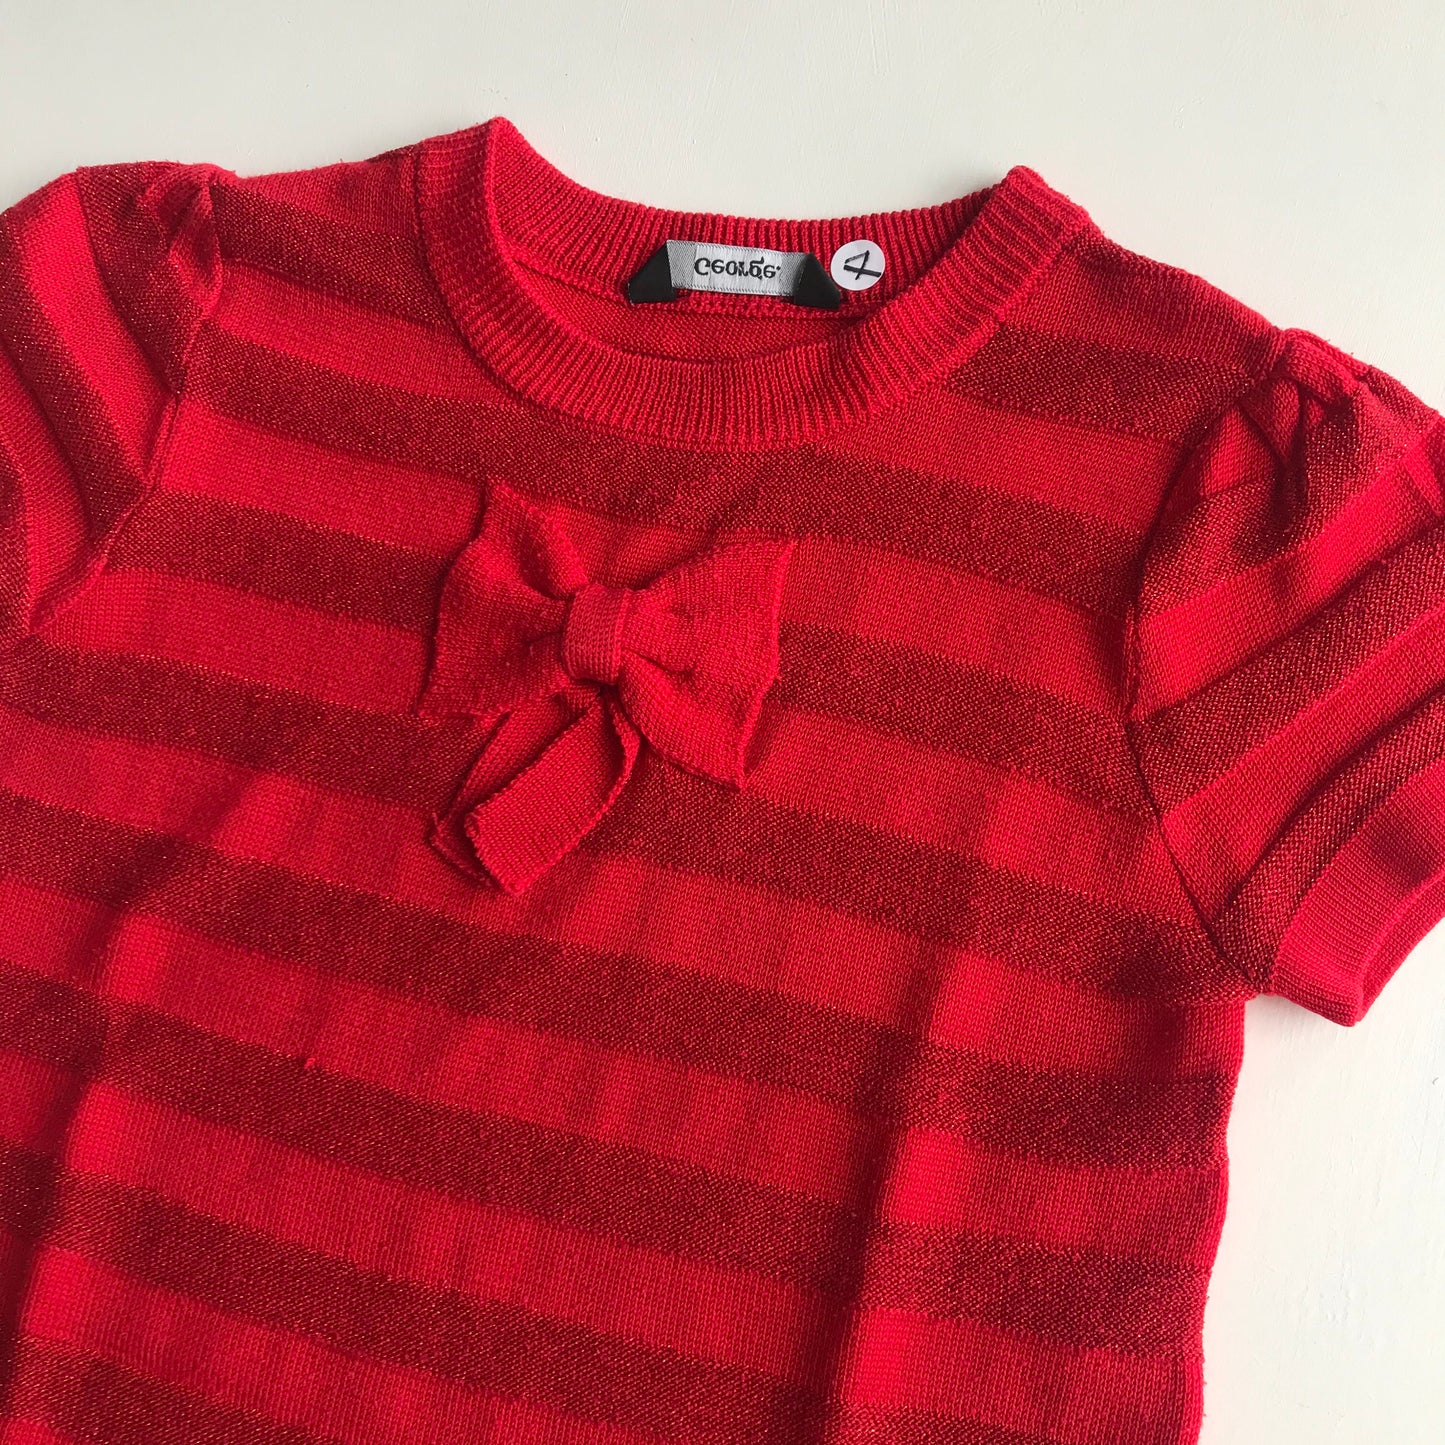 Dress - Red Knitted - Age 4